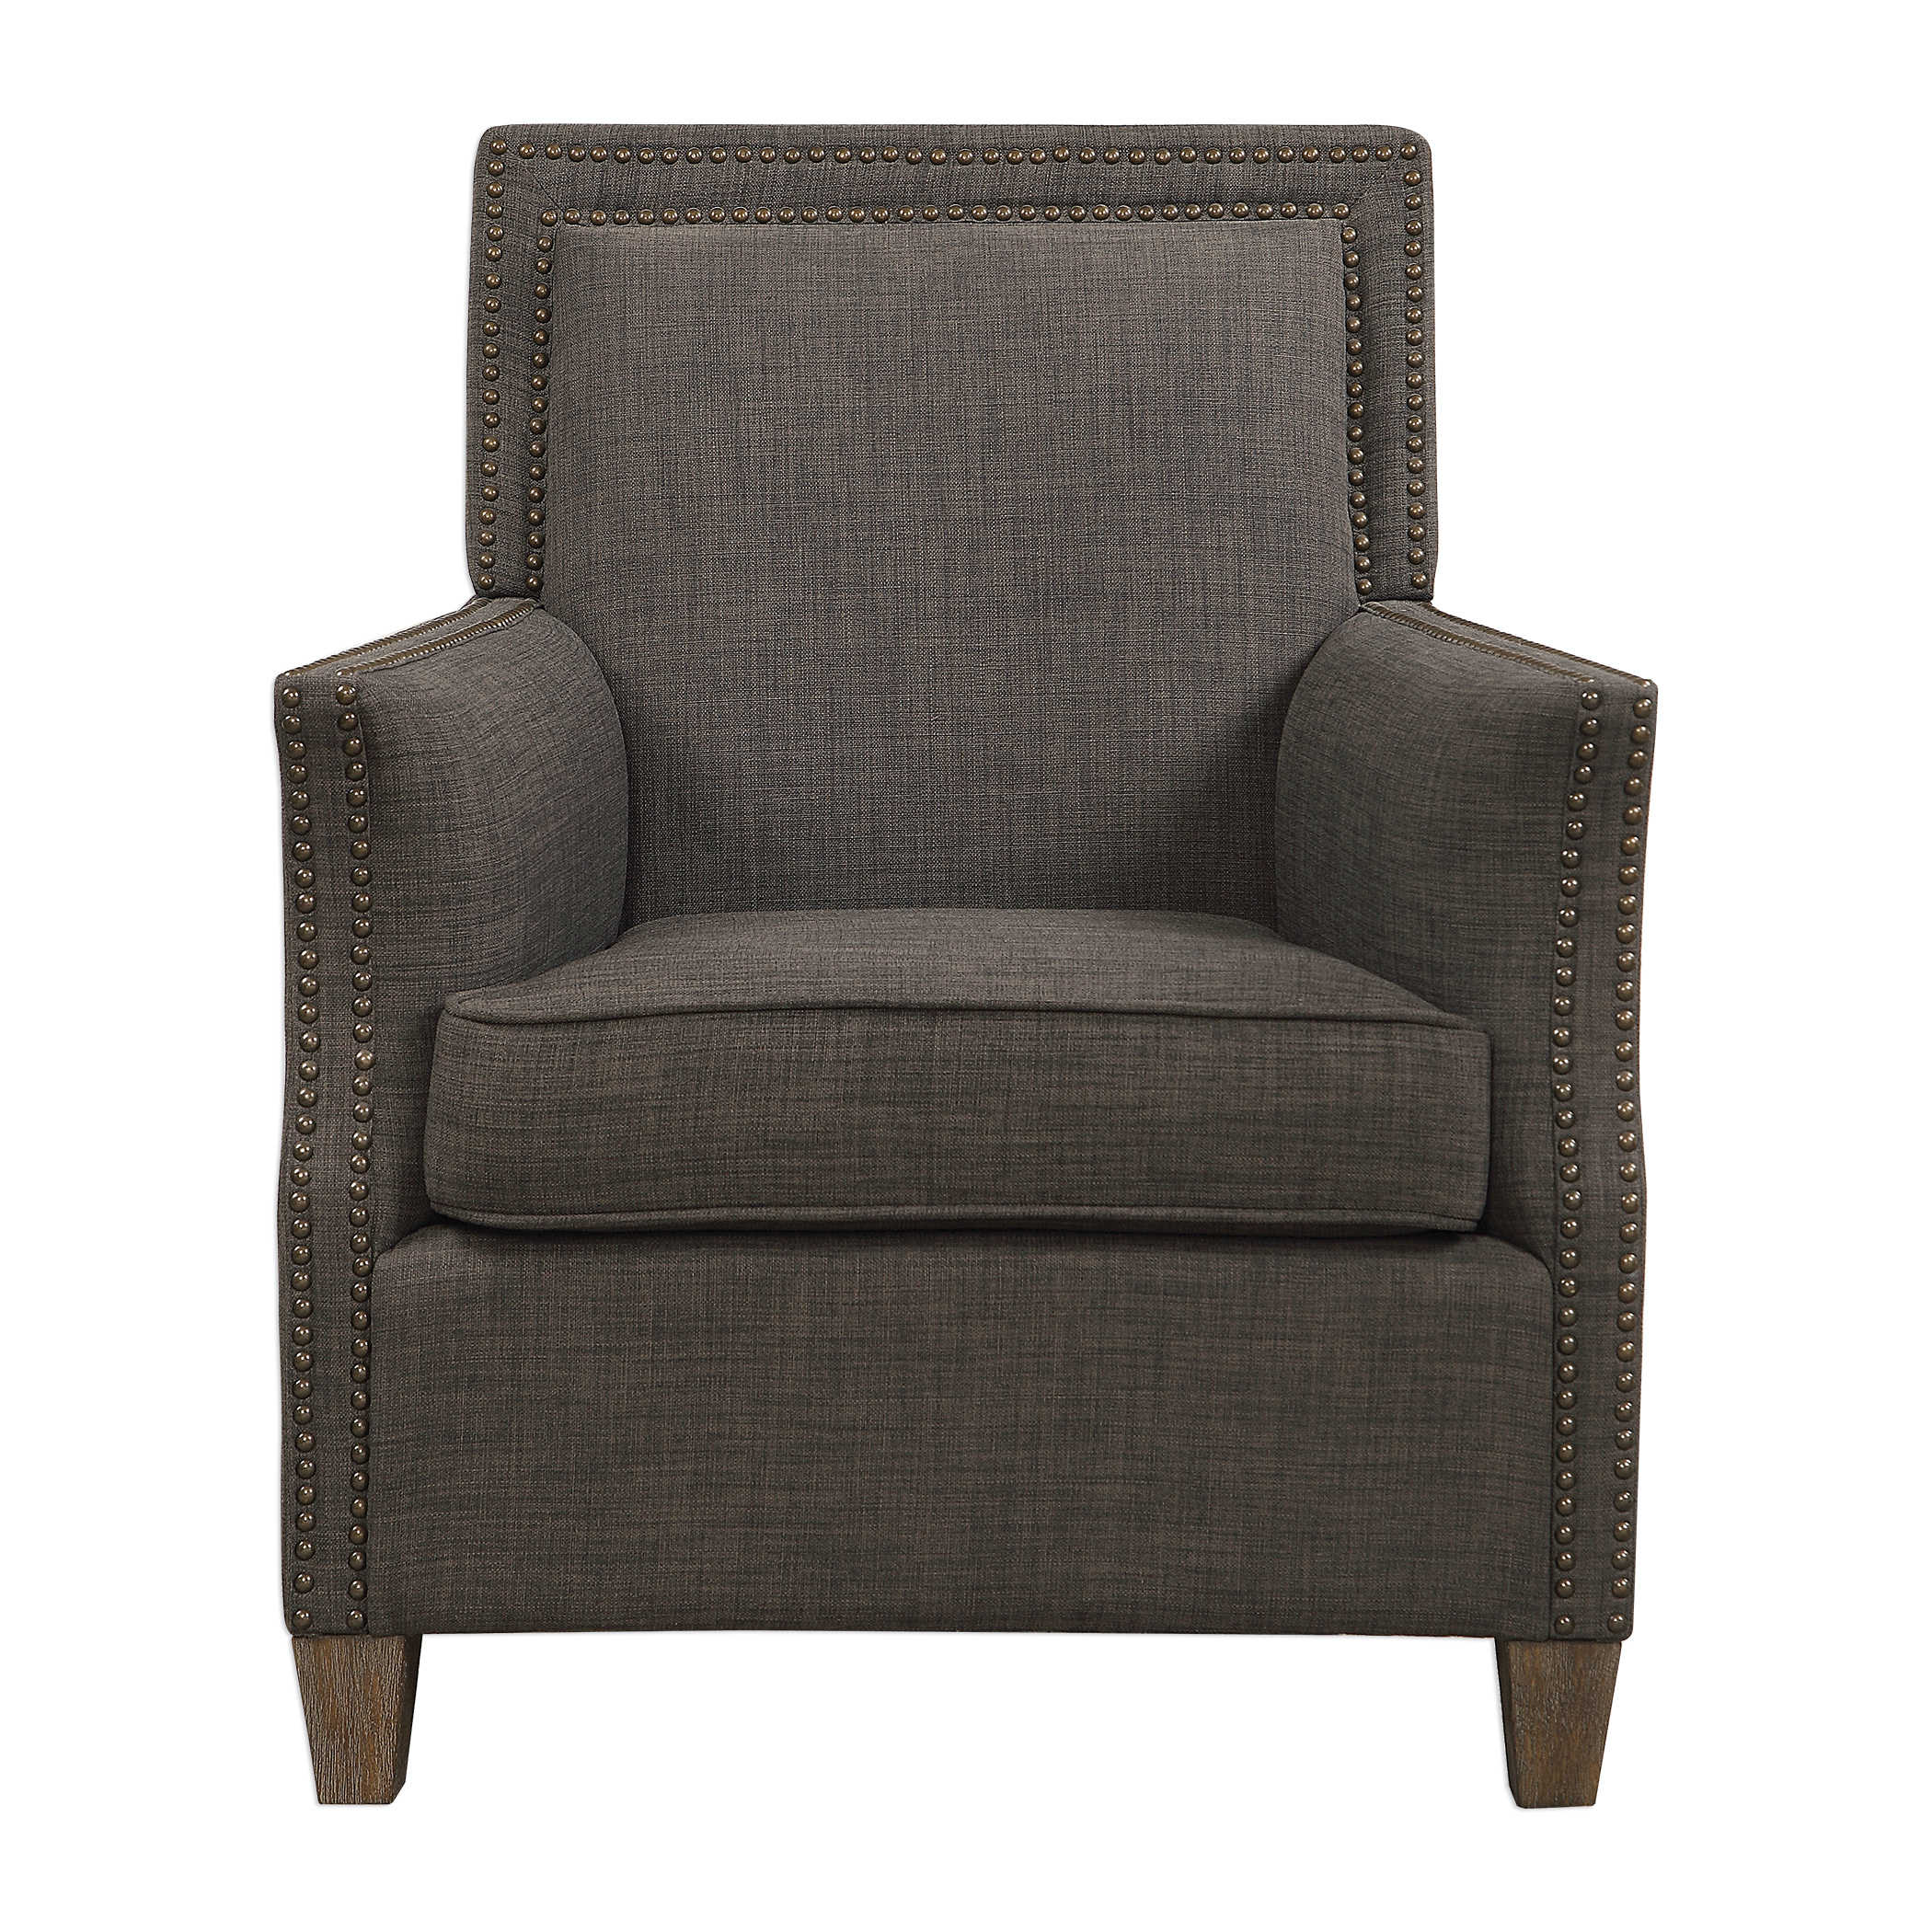 Uttermost Home Motor Freight - Rate to be Quoted Uttermost Darick Armchair, Charcoal